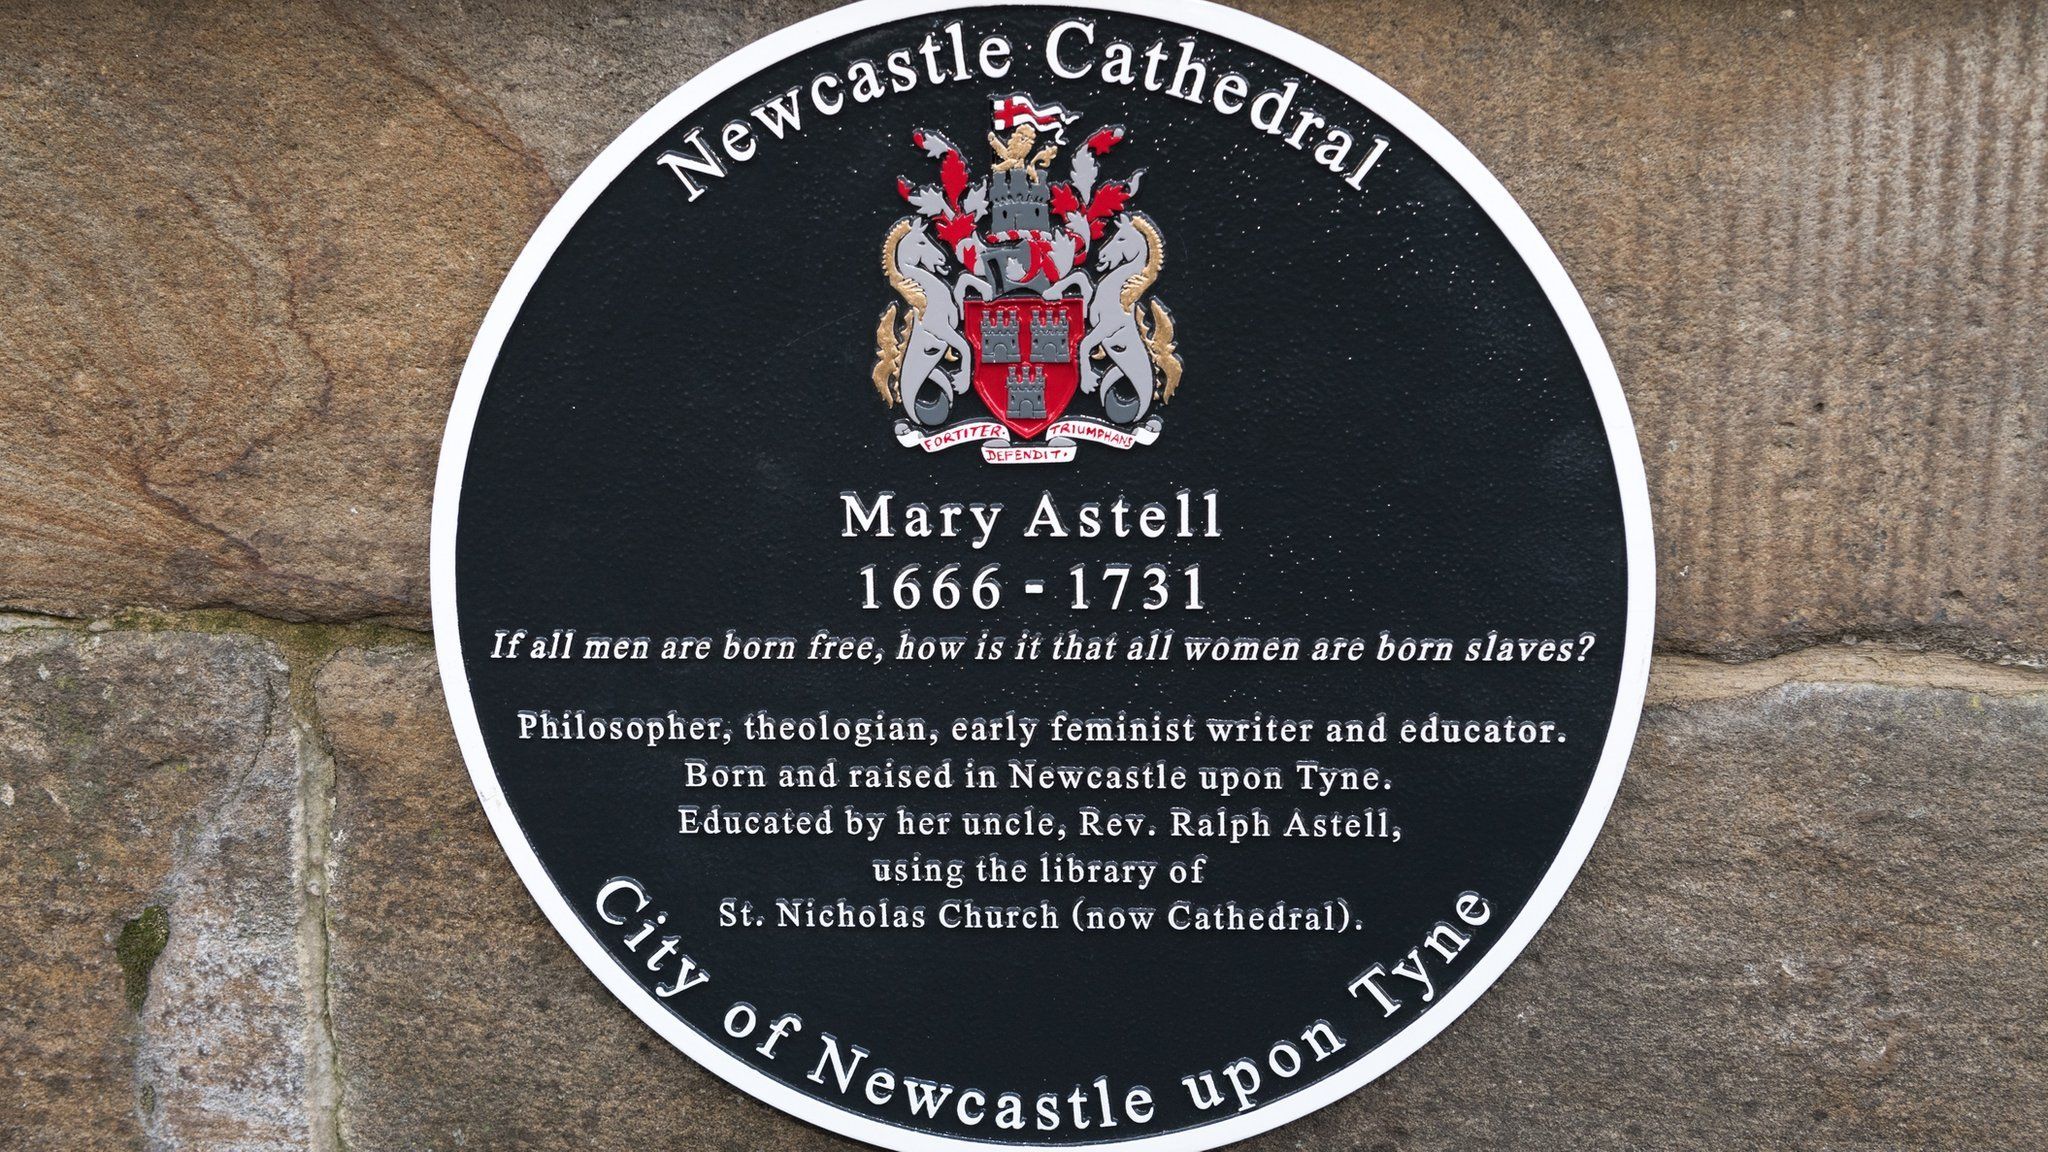 The commemorative plaque to Mary Astell